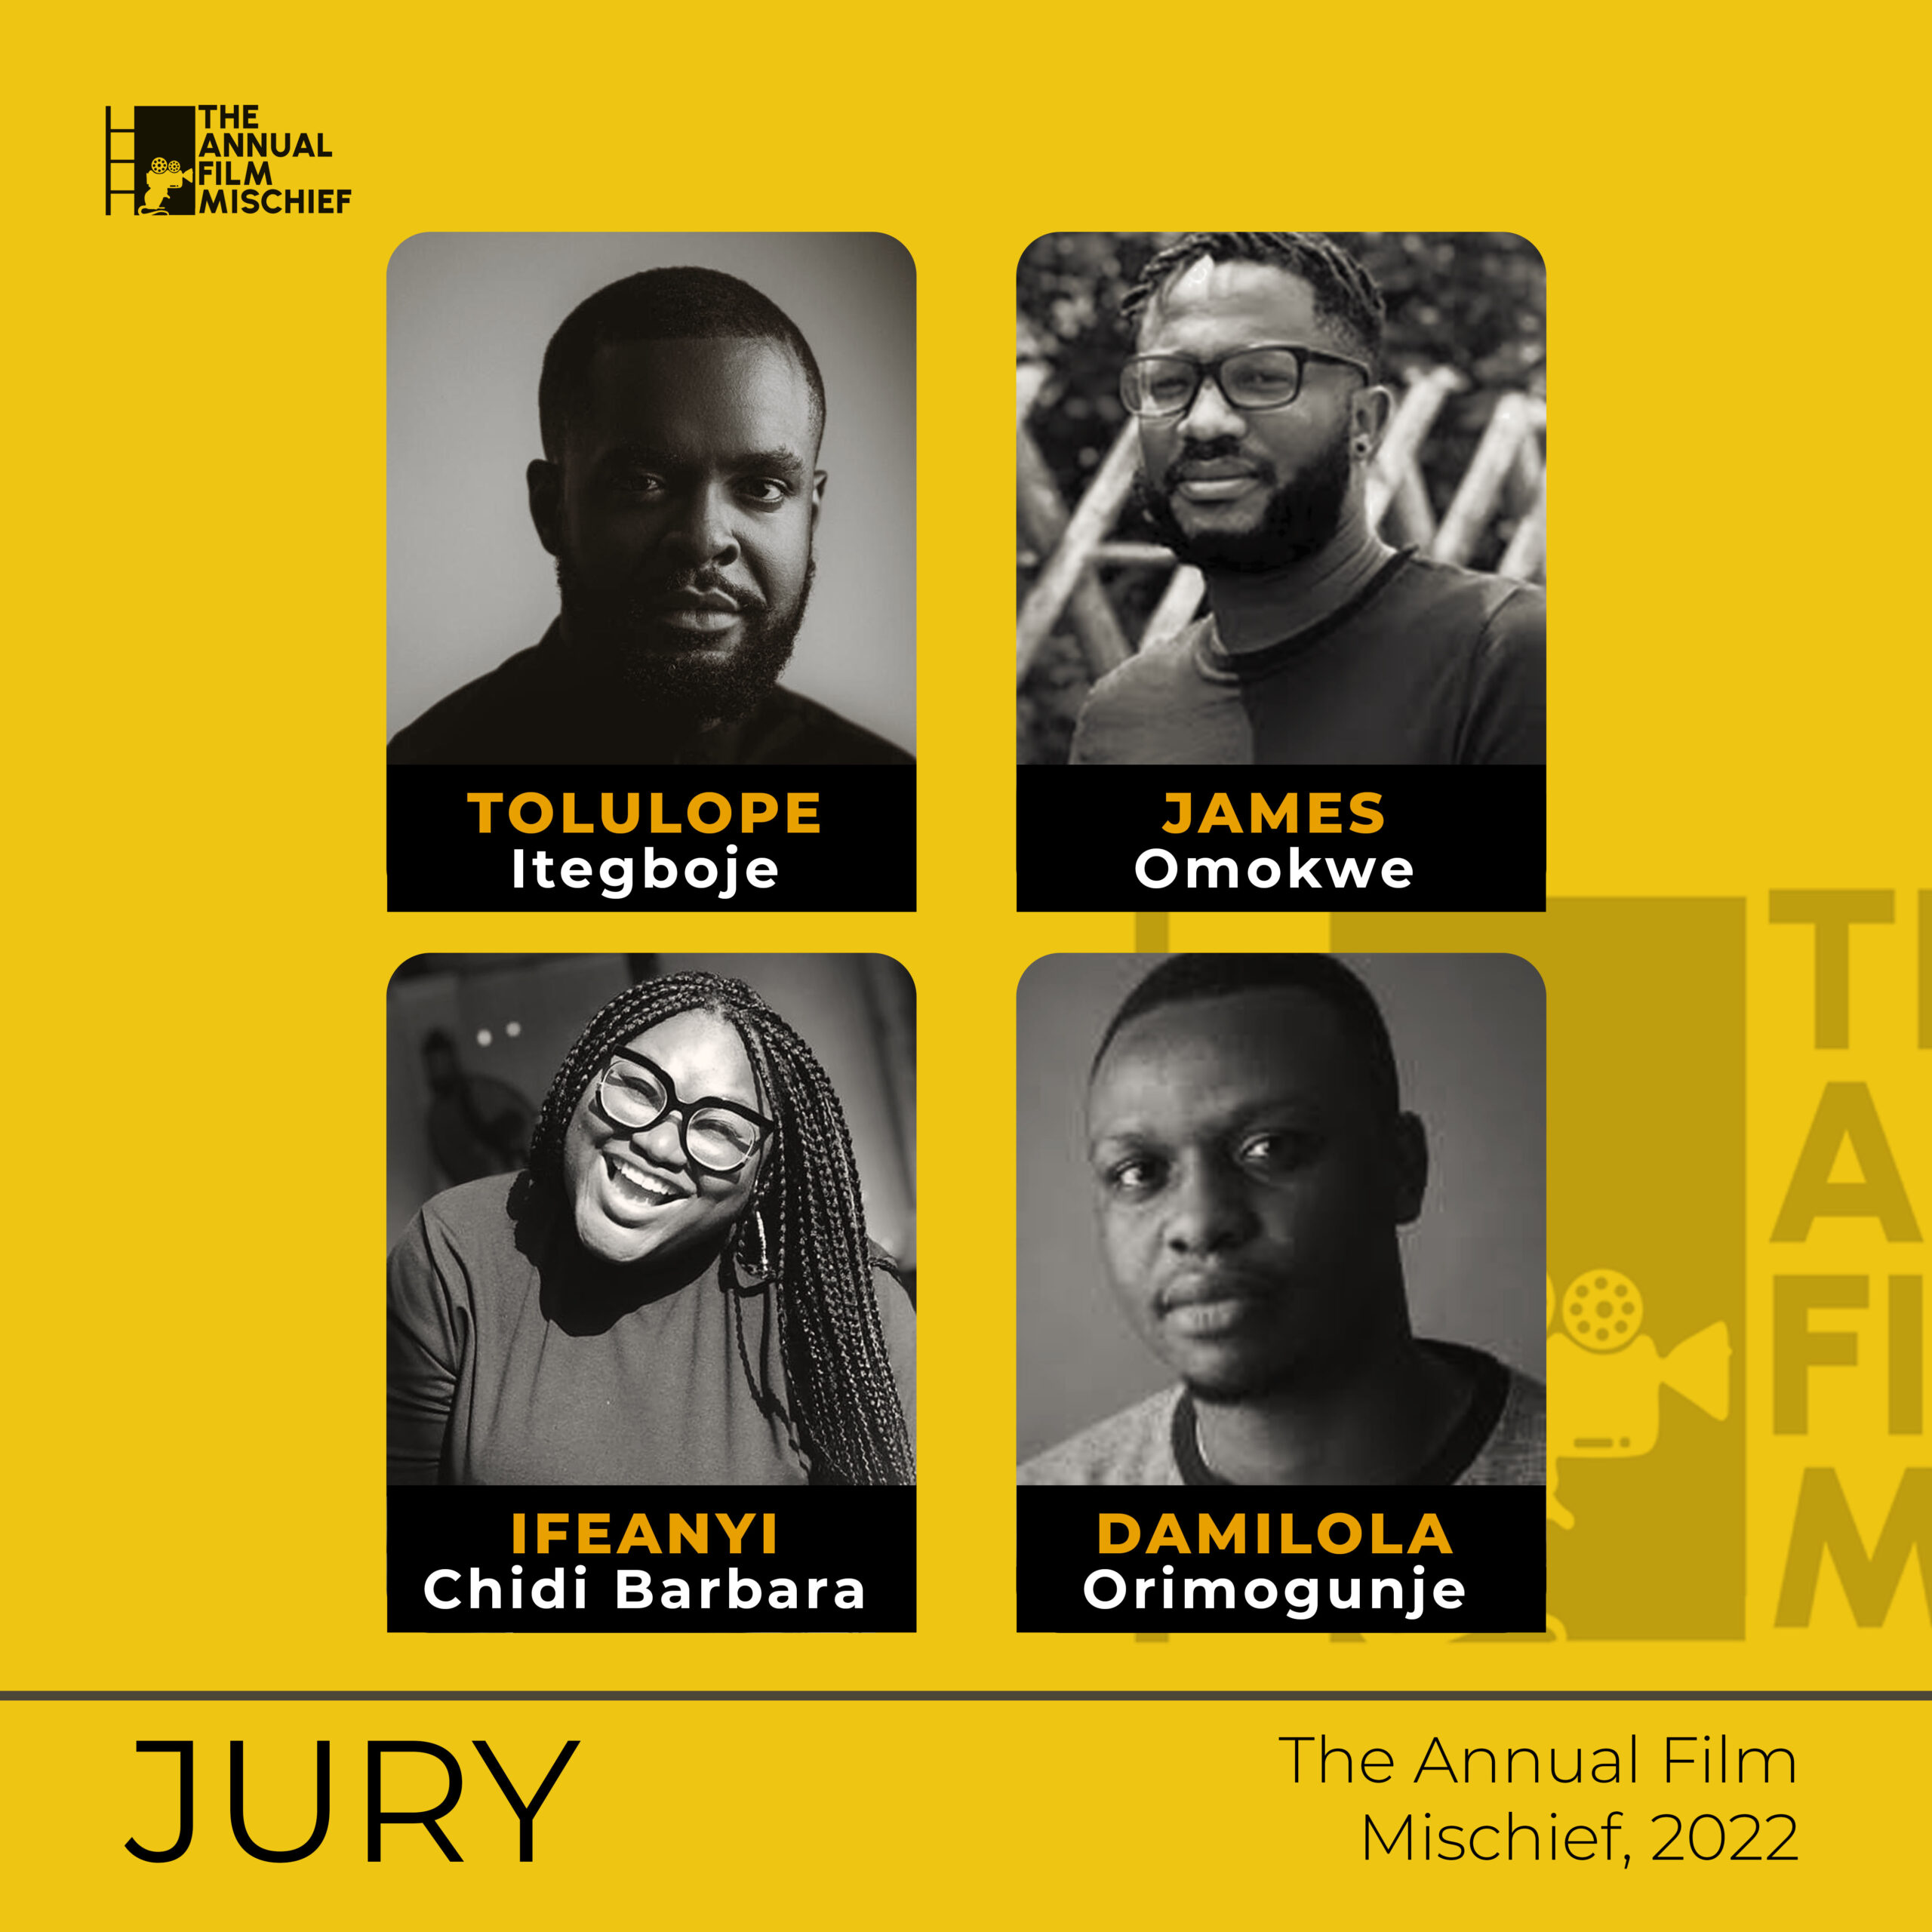 juryyyyy scaled - Film Rats Founder, Chukwu Martin On “The Annual Film Mischief” & What It Represents For Nollywood